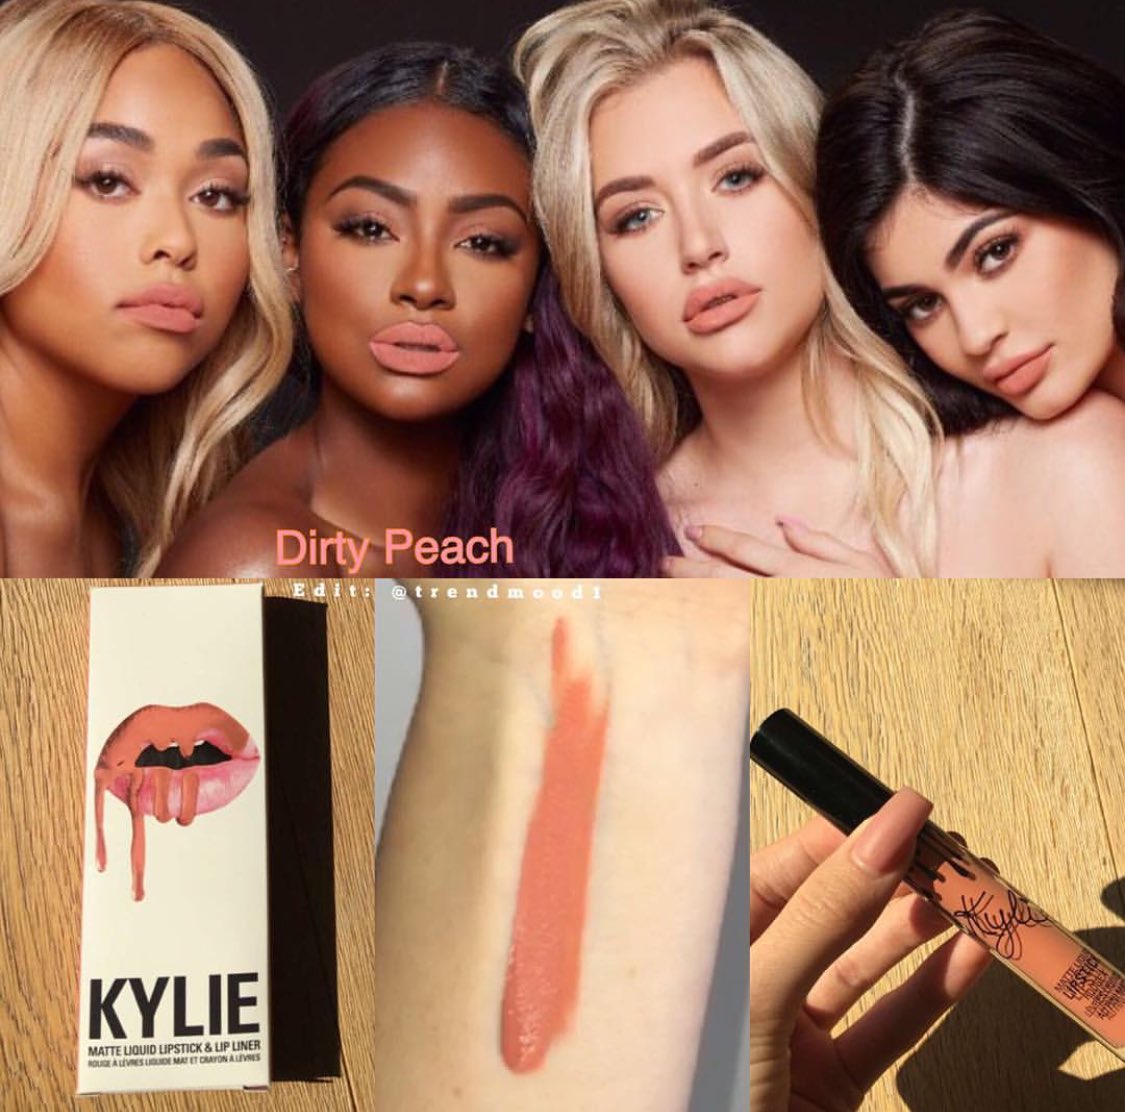 First shade of kylie's new matte lip kits: Dirty Peachpic.twitter.com/...